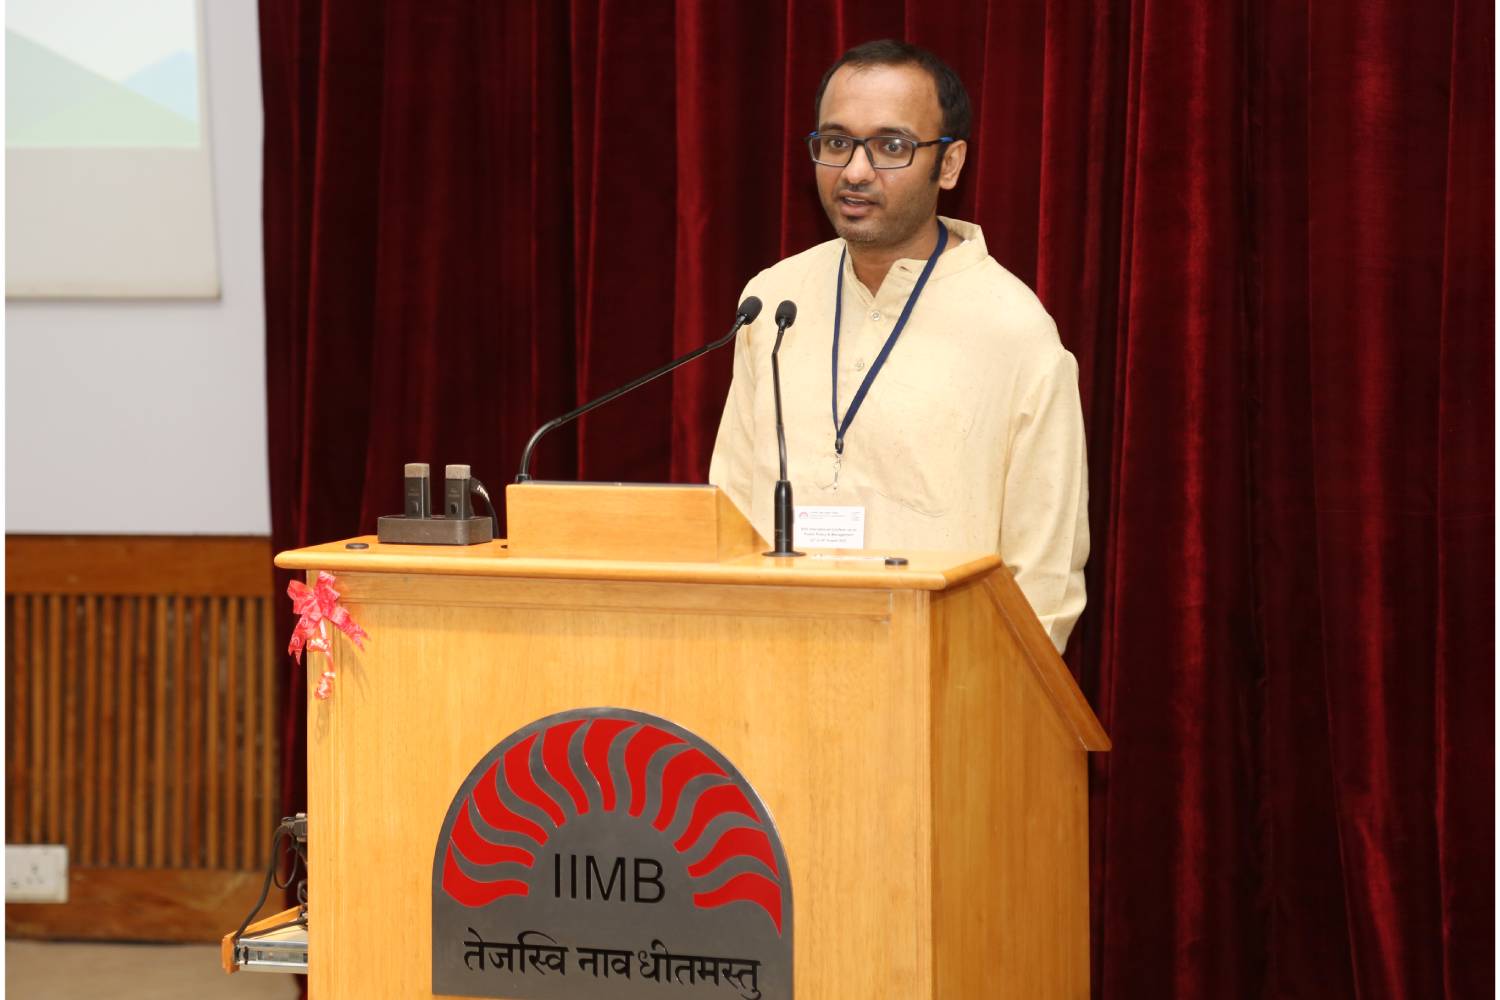 Prof. Arpit Shah, faculty of the Public Policy area at IIMB, introduces Shri C. Chandramouli to the audience, during the Public Policy & Management conference, on 23rd August 2022.